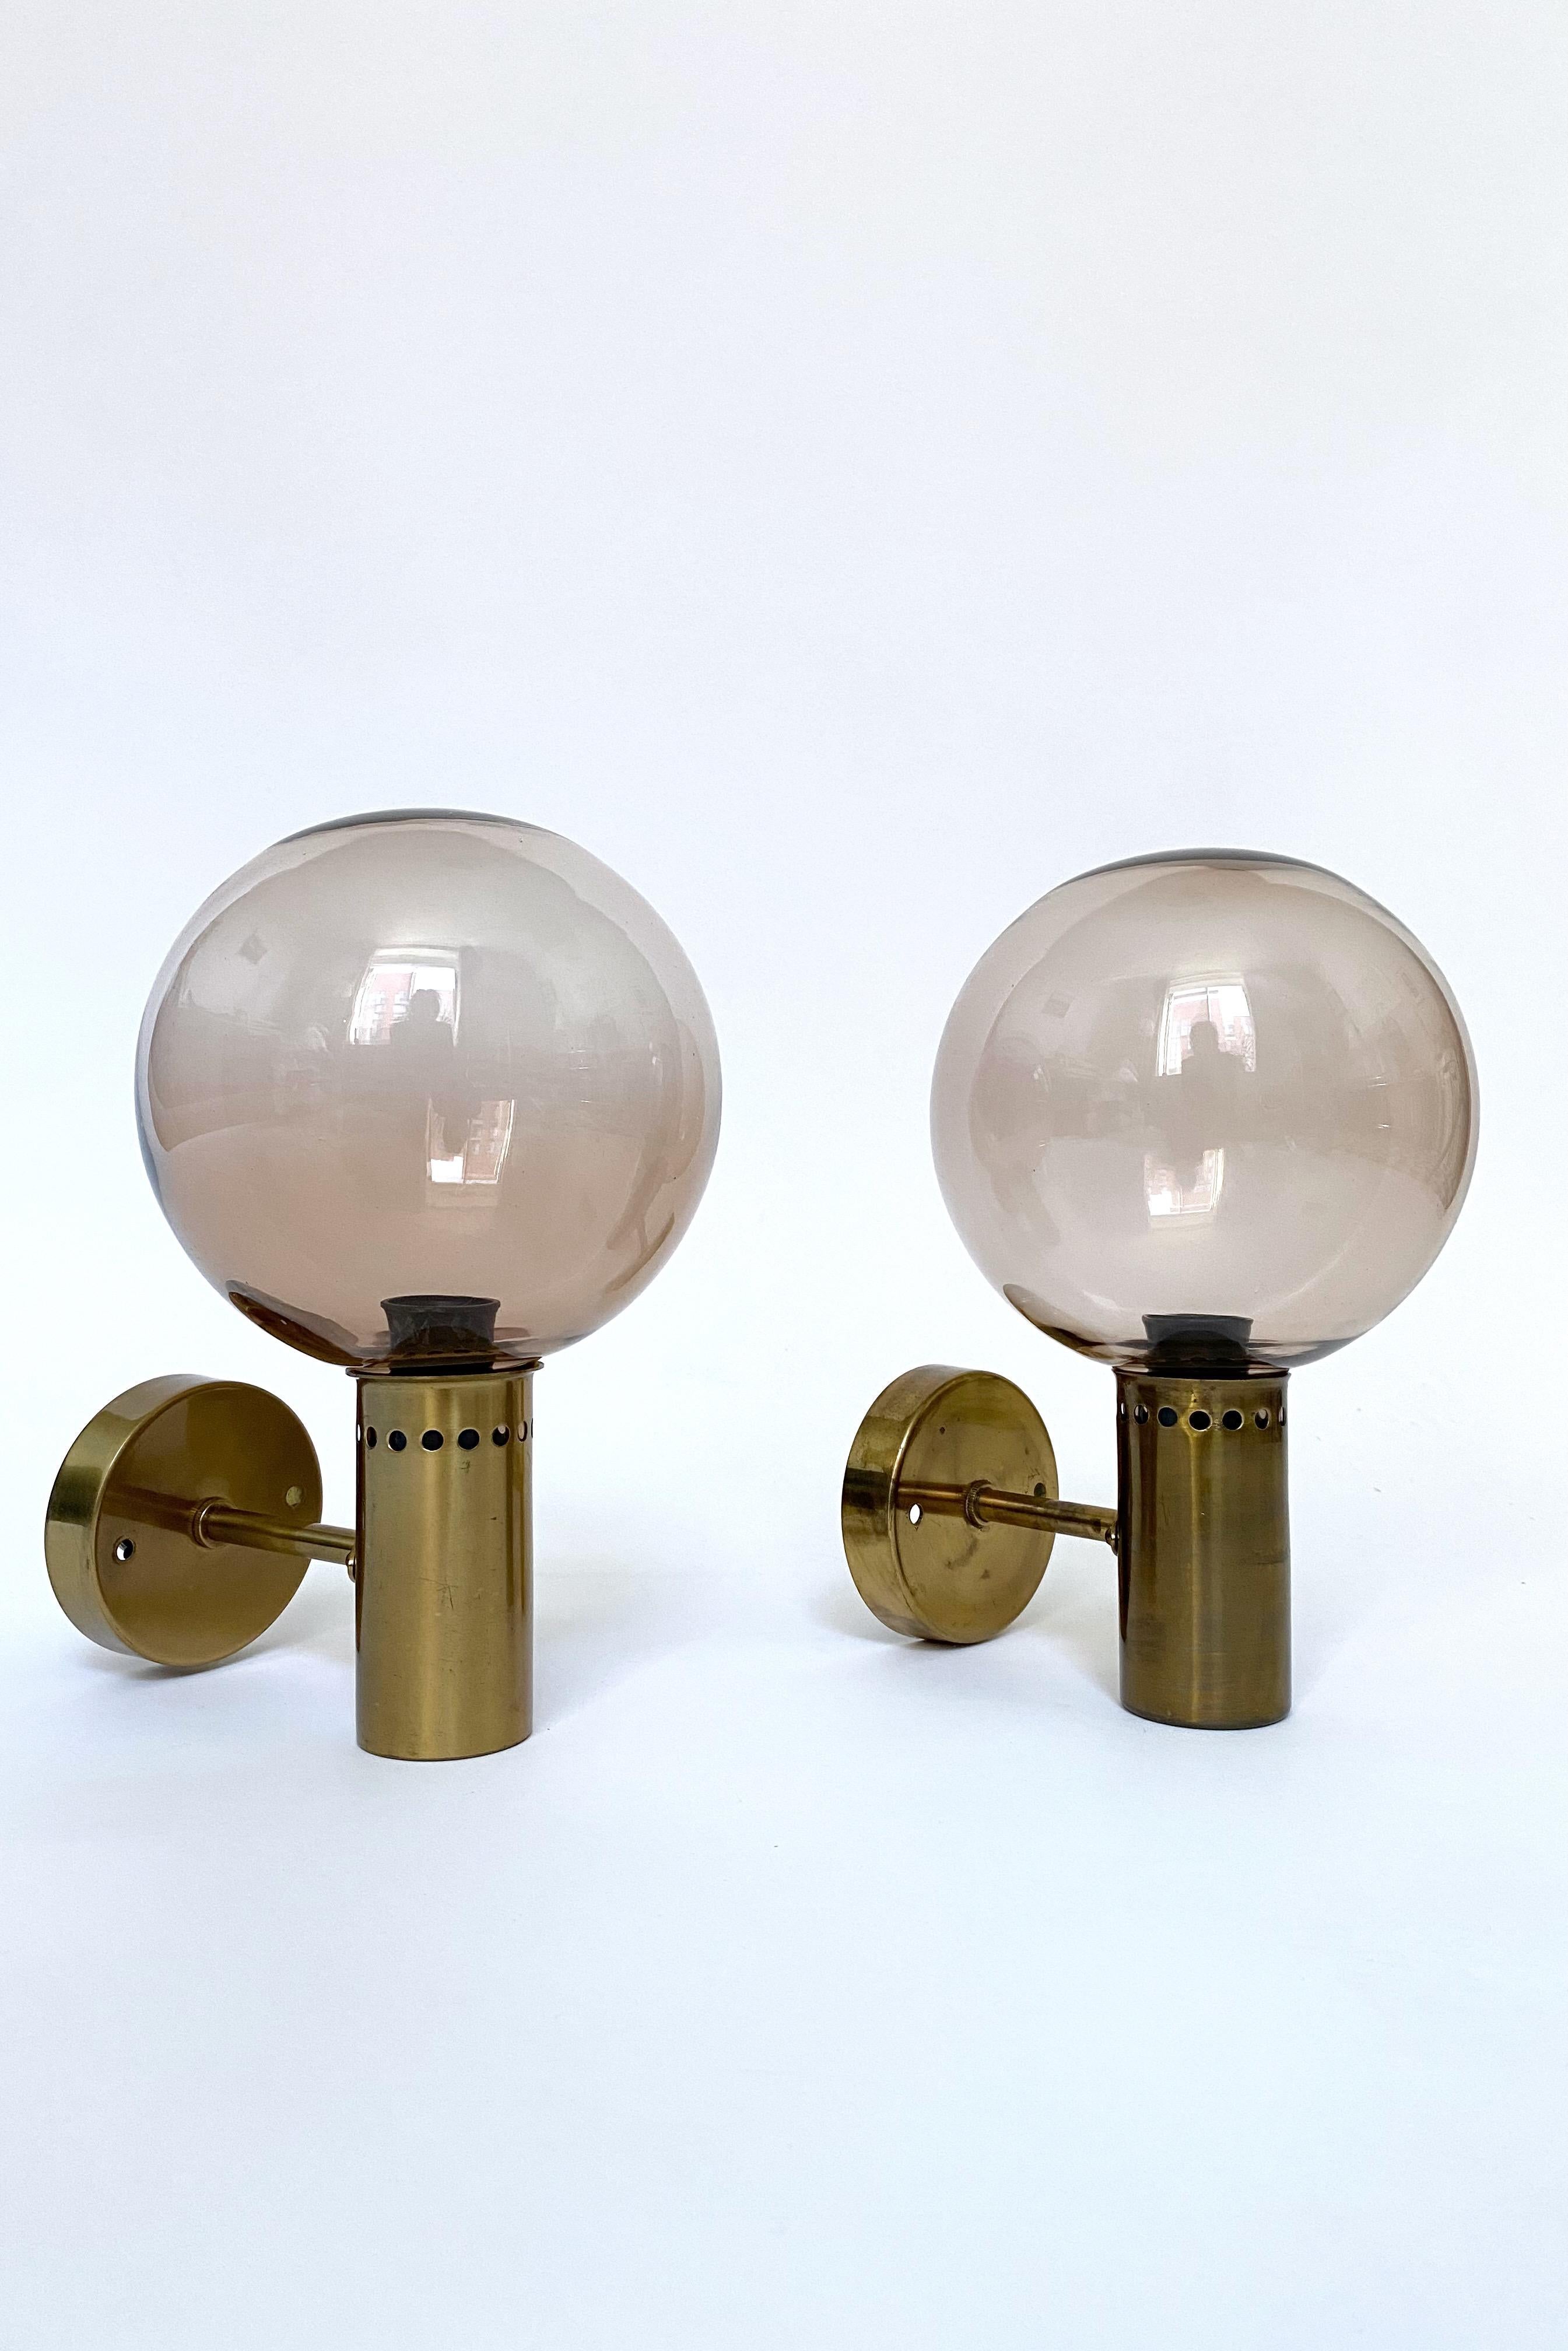 Wall lights in model S-1987 by the iconic Swedish lamp designer Hans Agne Jakobsson for his eponymous company in Markaryd, Sweden.

Made in the 1950's this is the model S-1987 with brass holder and smokey pink glass globes. Age appropriate wear to